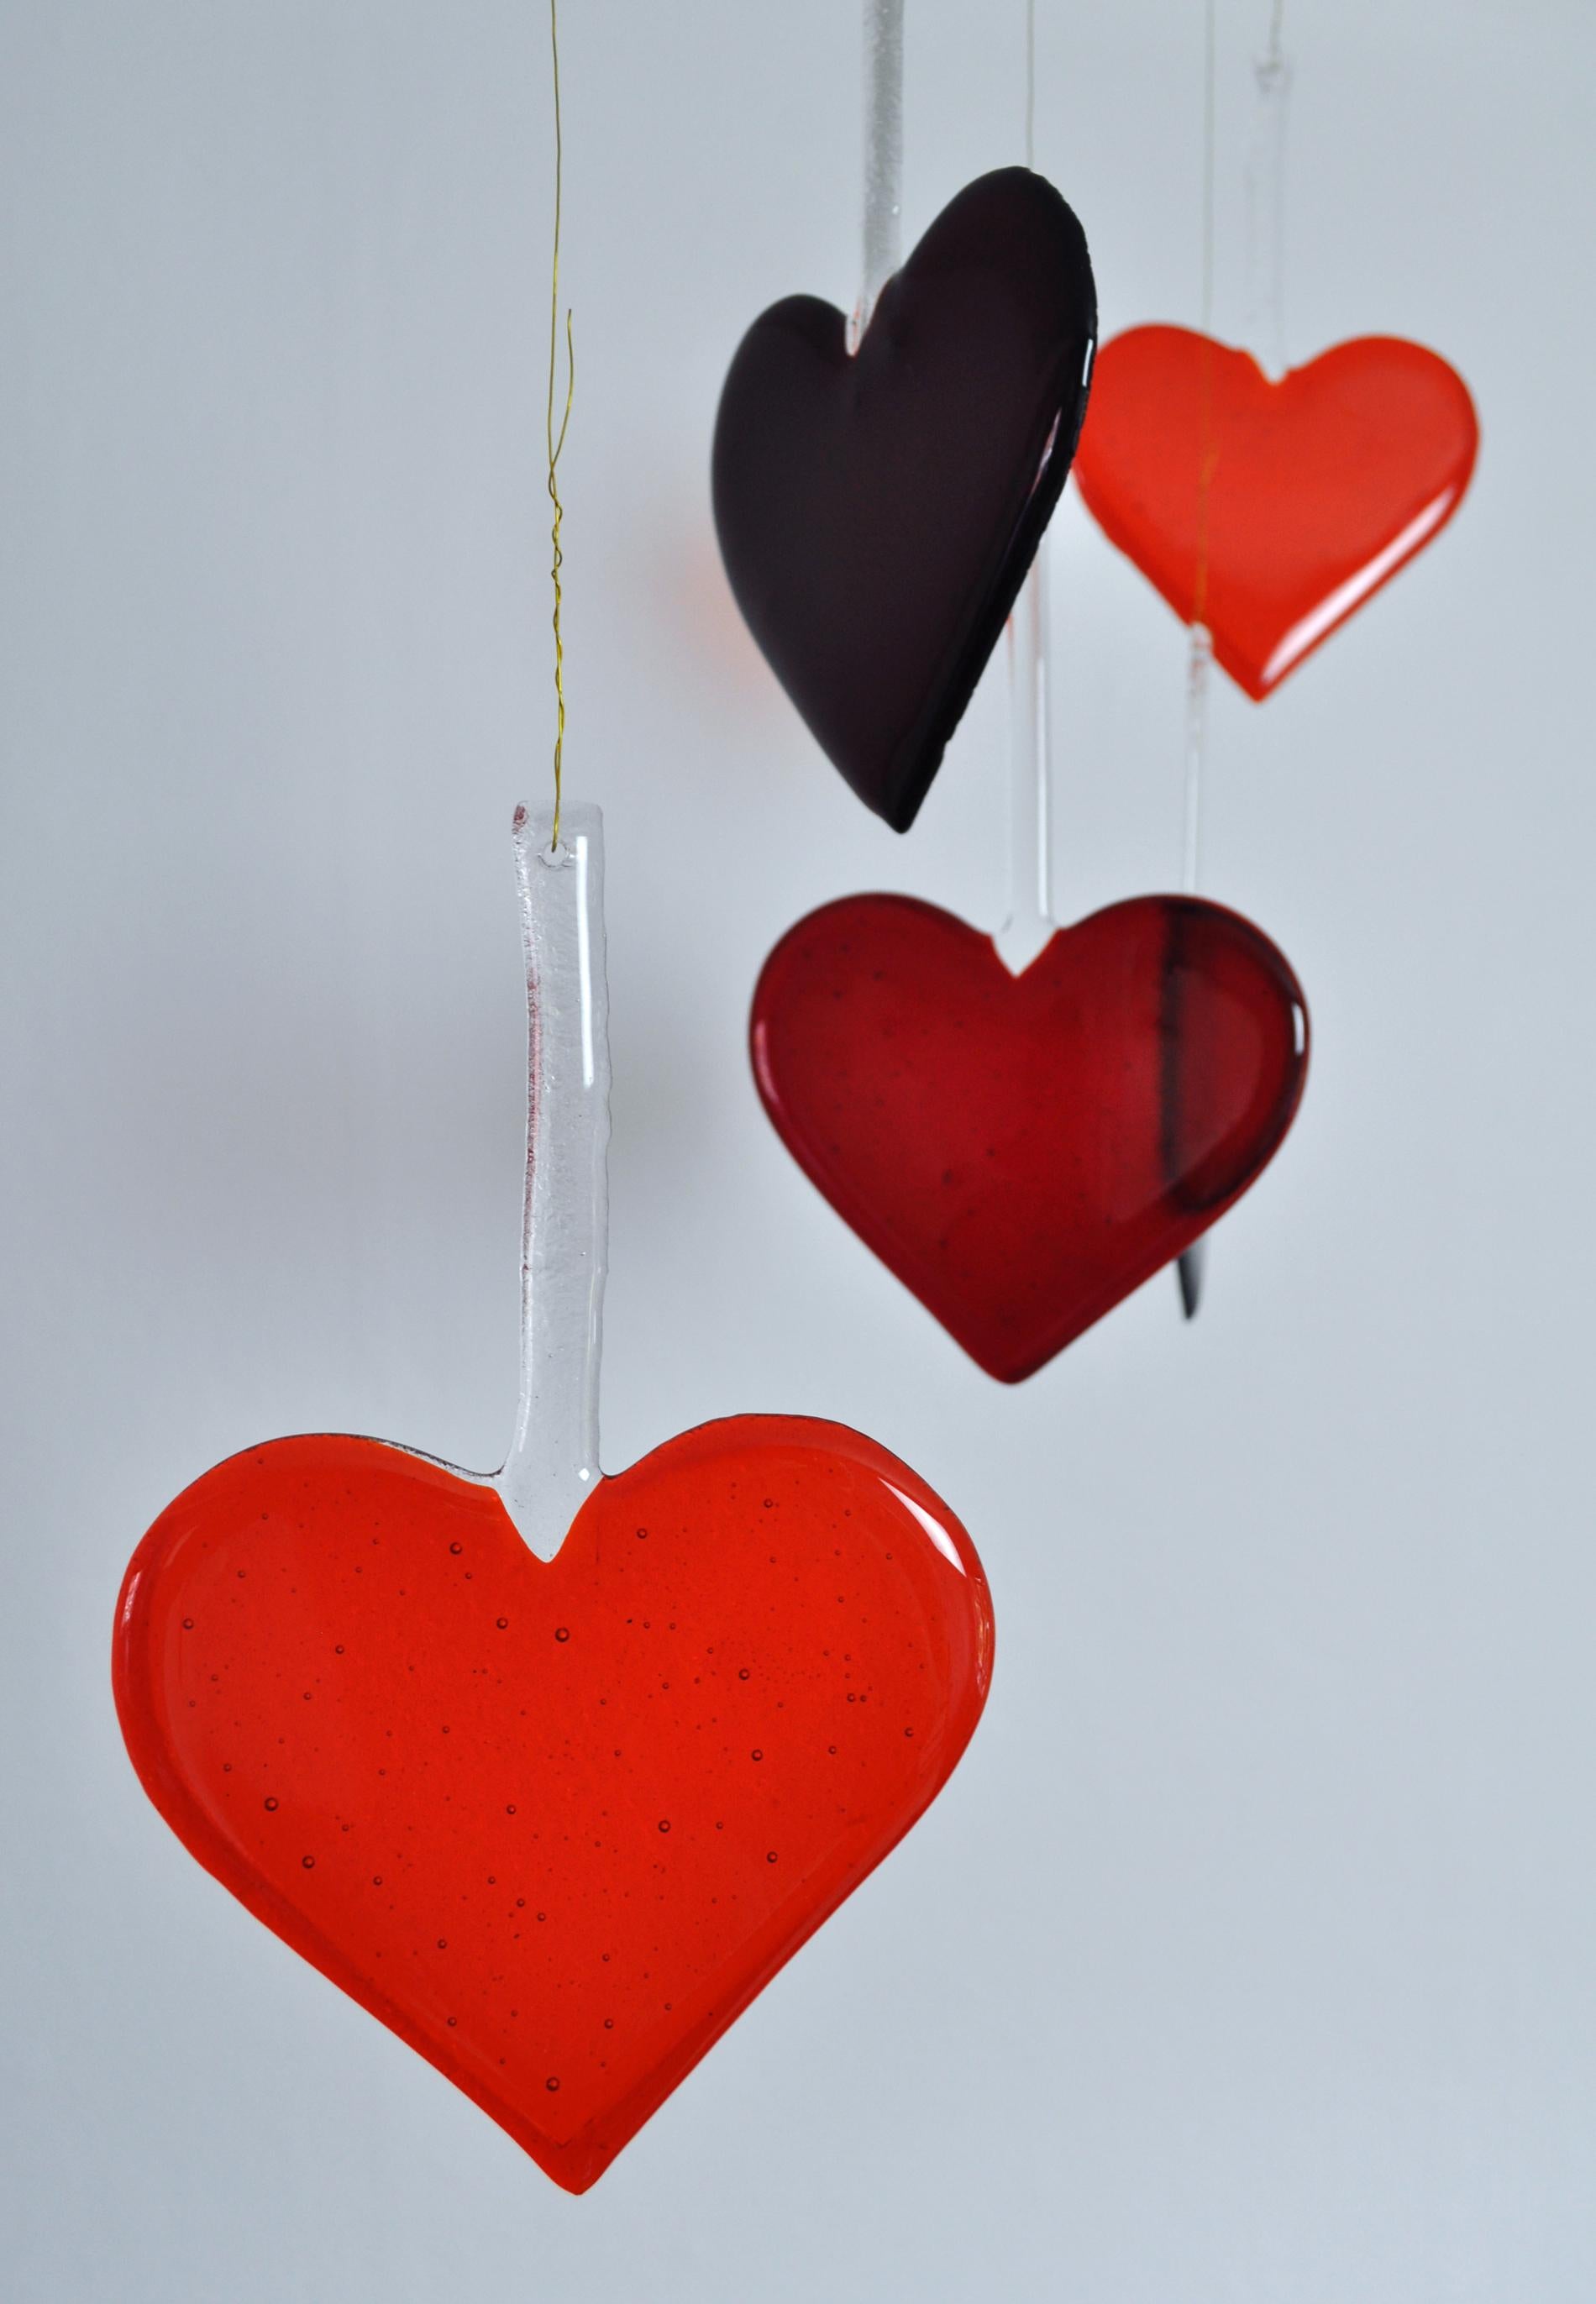 Beautiful handcrafted Christmas glass heart ornament in a dark red color.
Perfect for X-mas decorations.